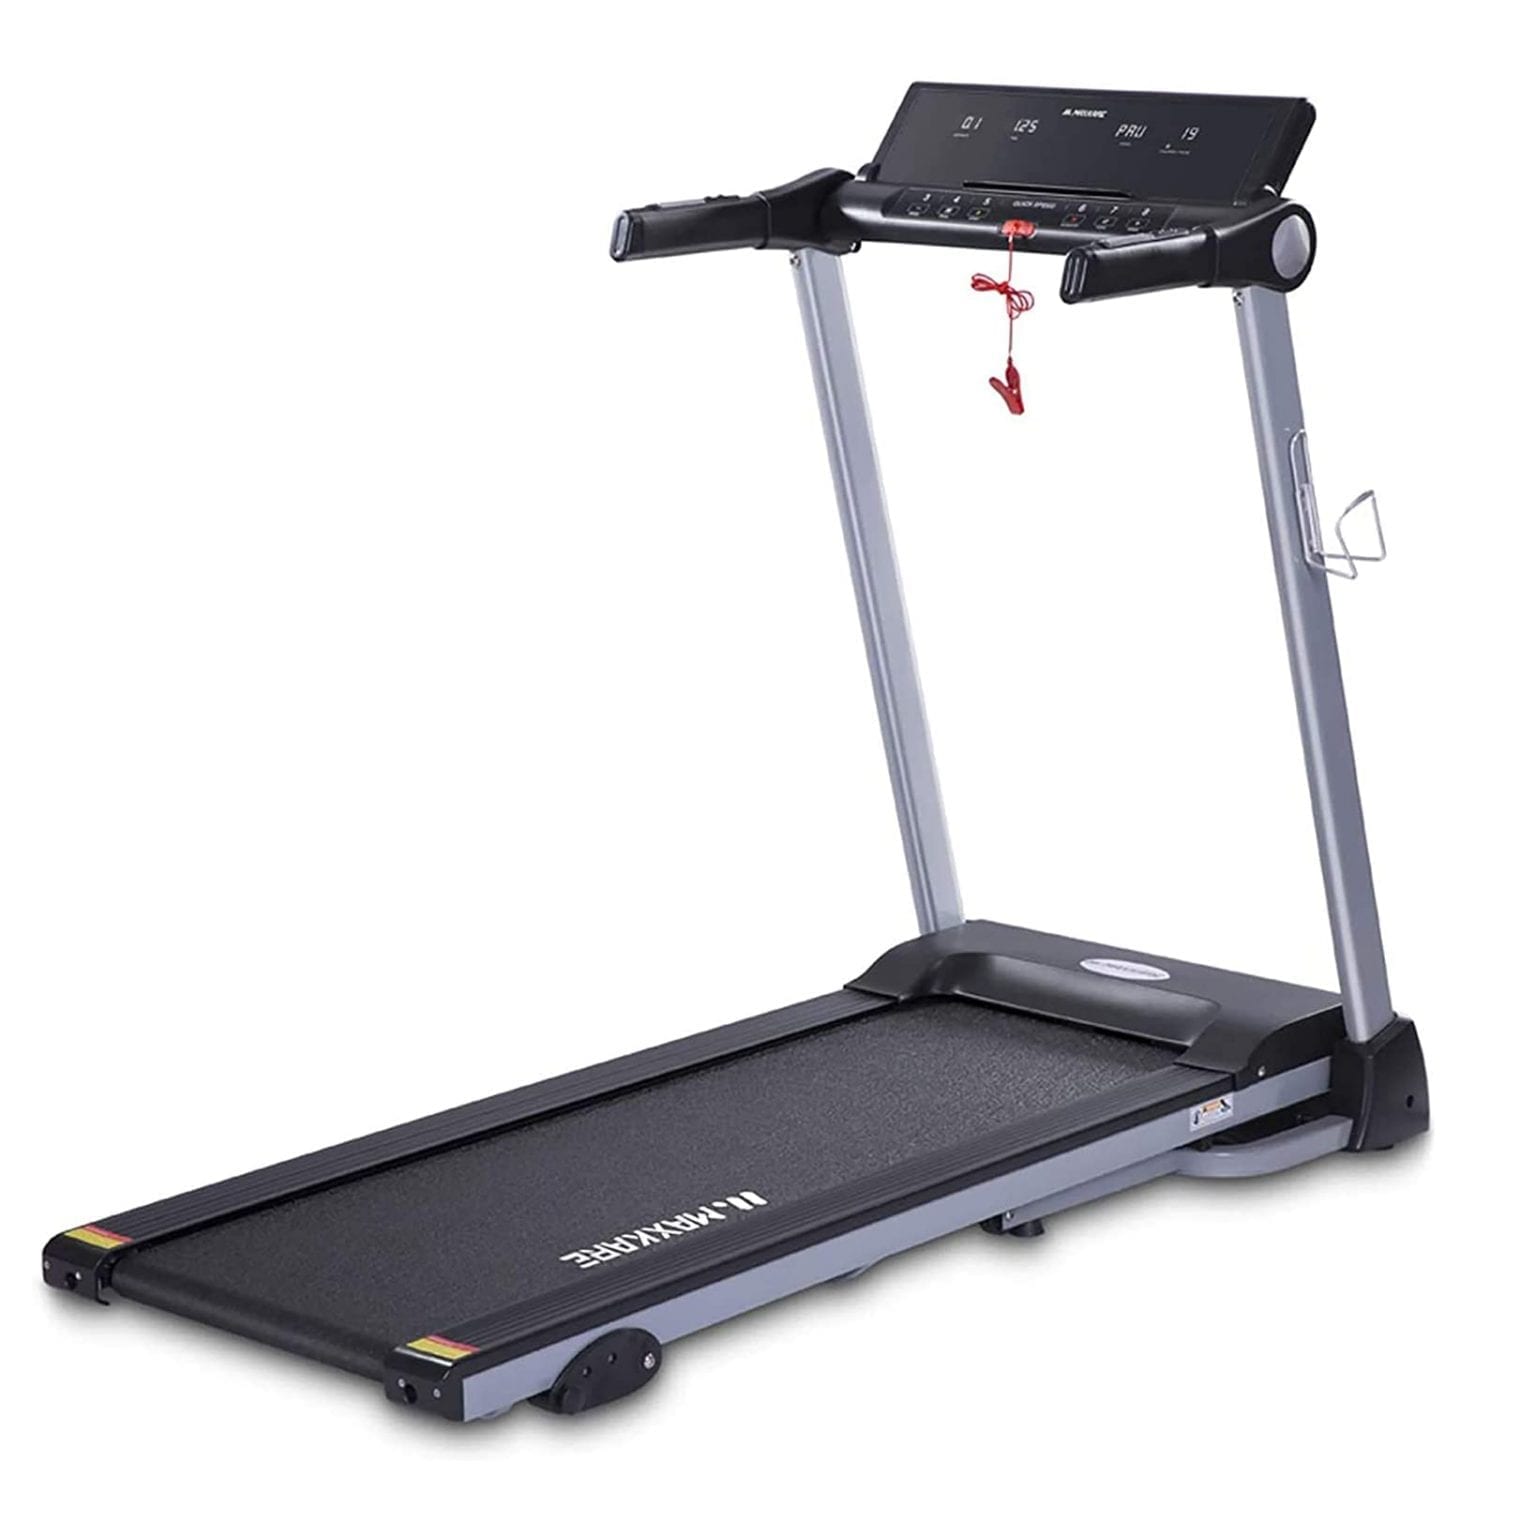 The 10 Best Folding Treadmills in 2021 Reviews - Buyer's Guide